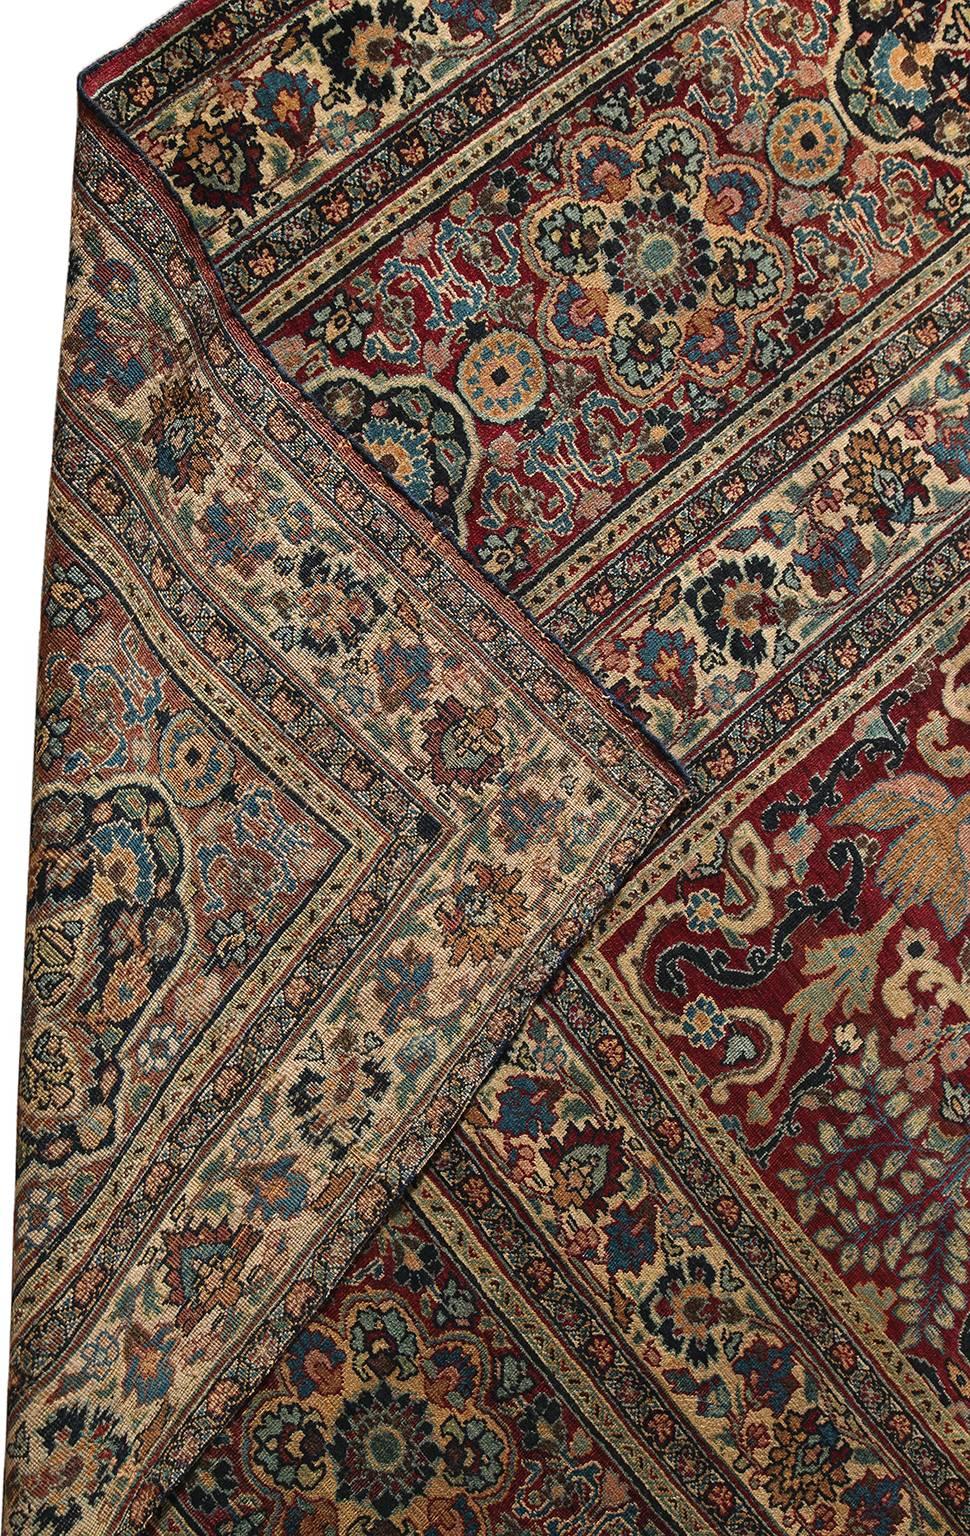 Vegetable Dyed Antique 1870s Persian Tabriz Rug Woven by Order of Prince Shahrukh Mirza, 13x21 For Sale